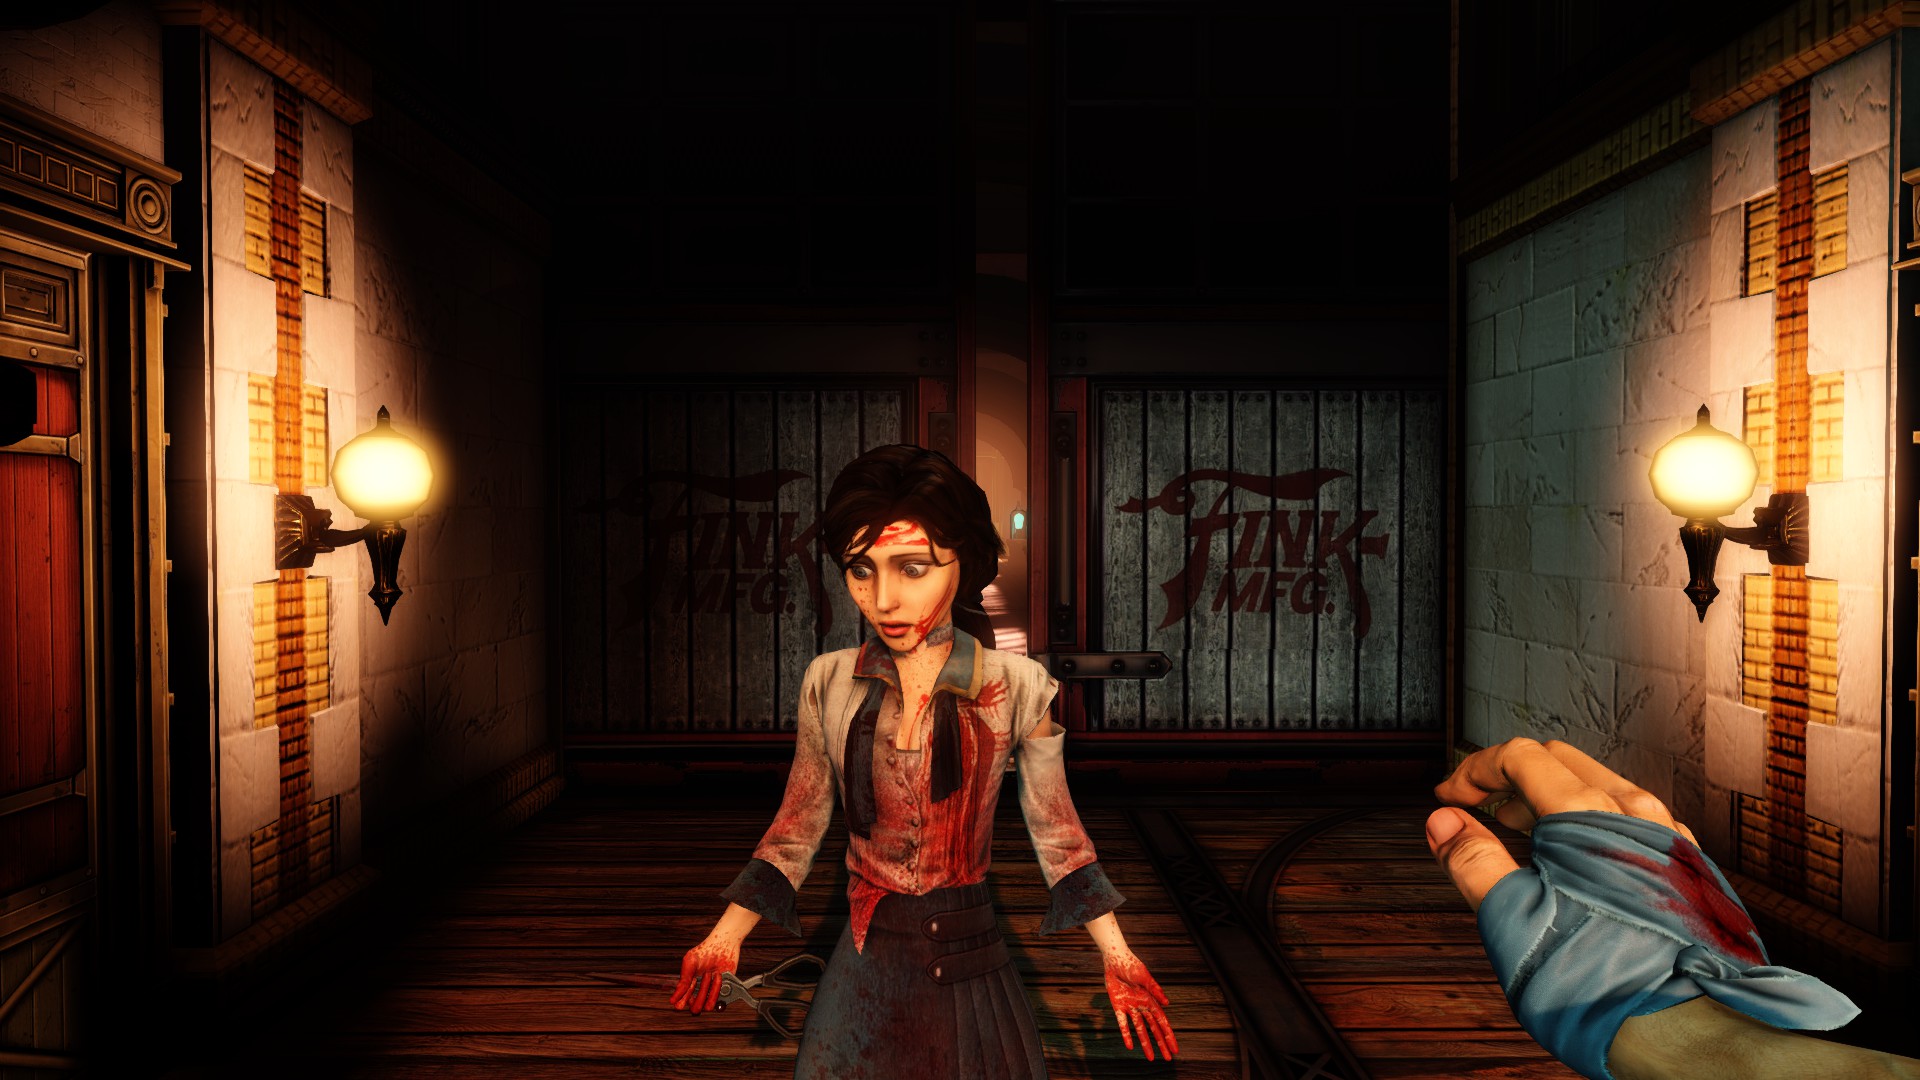 Top 10 Moments that put the Shock Back in Bioshock